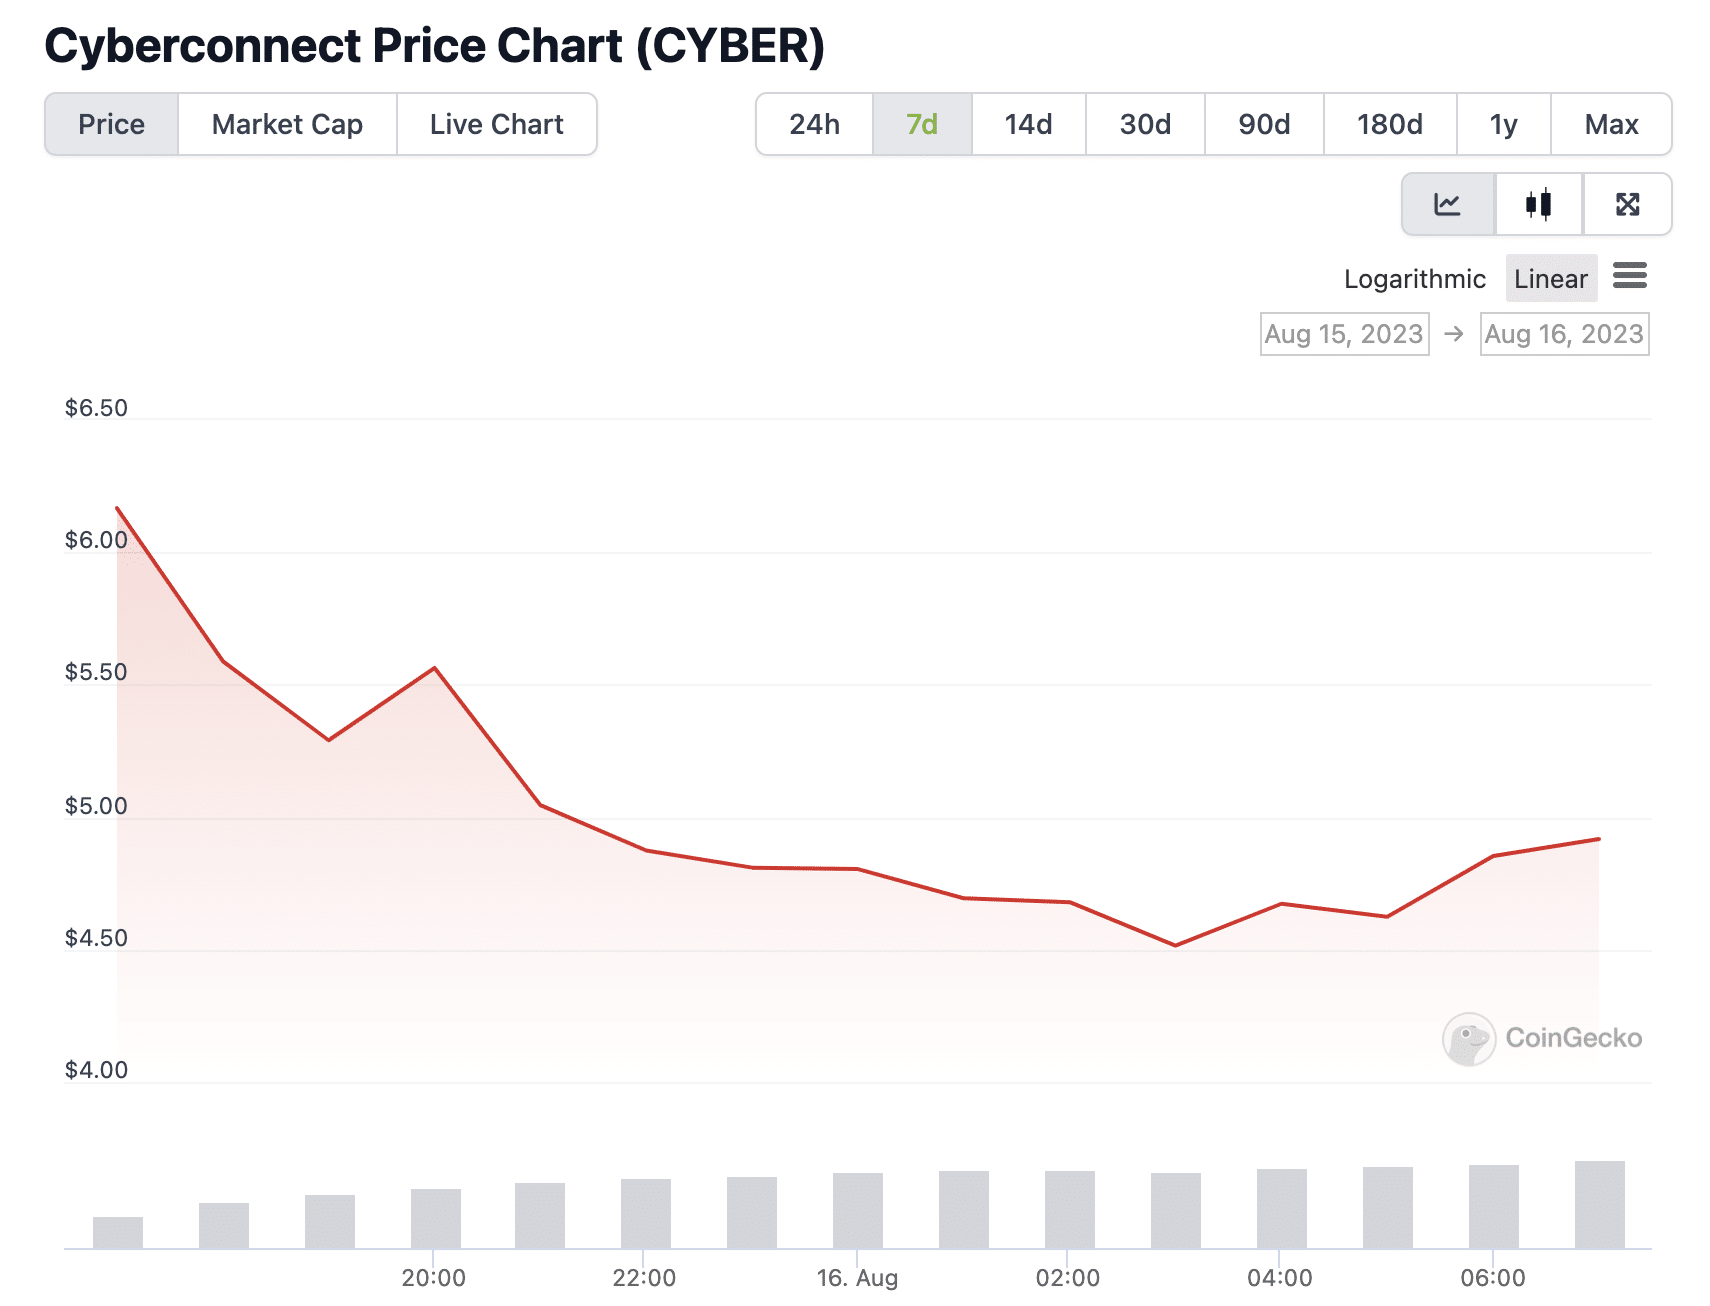 CYBER price chart | Source: CoinGecko